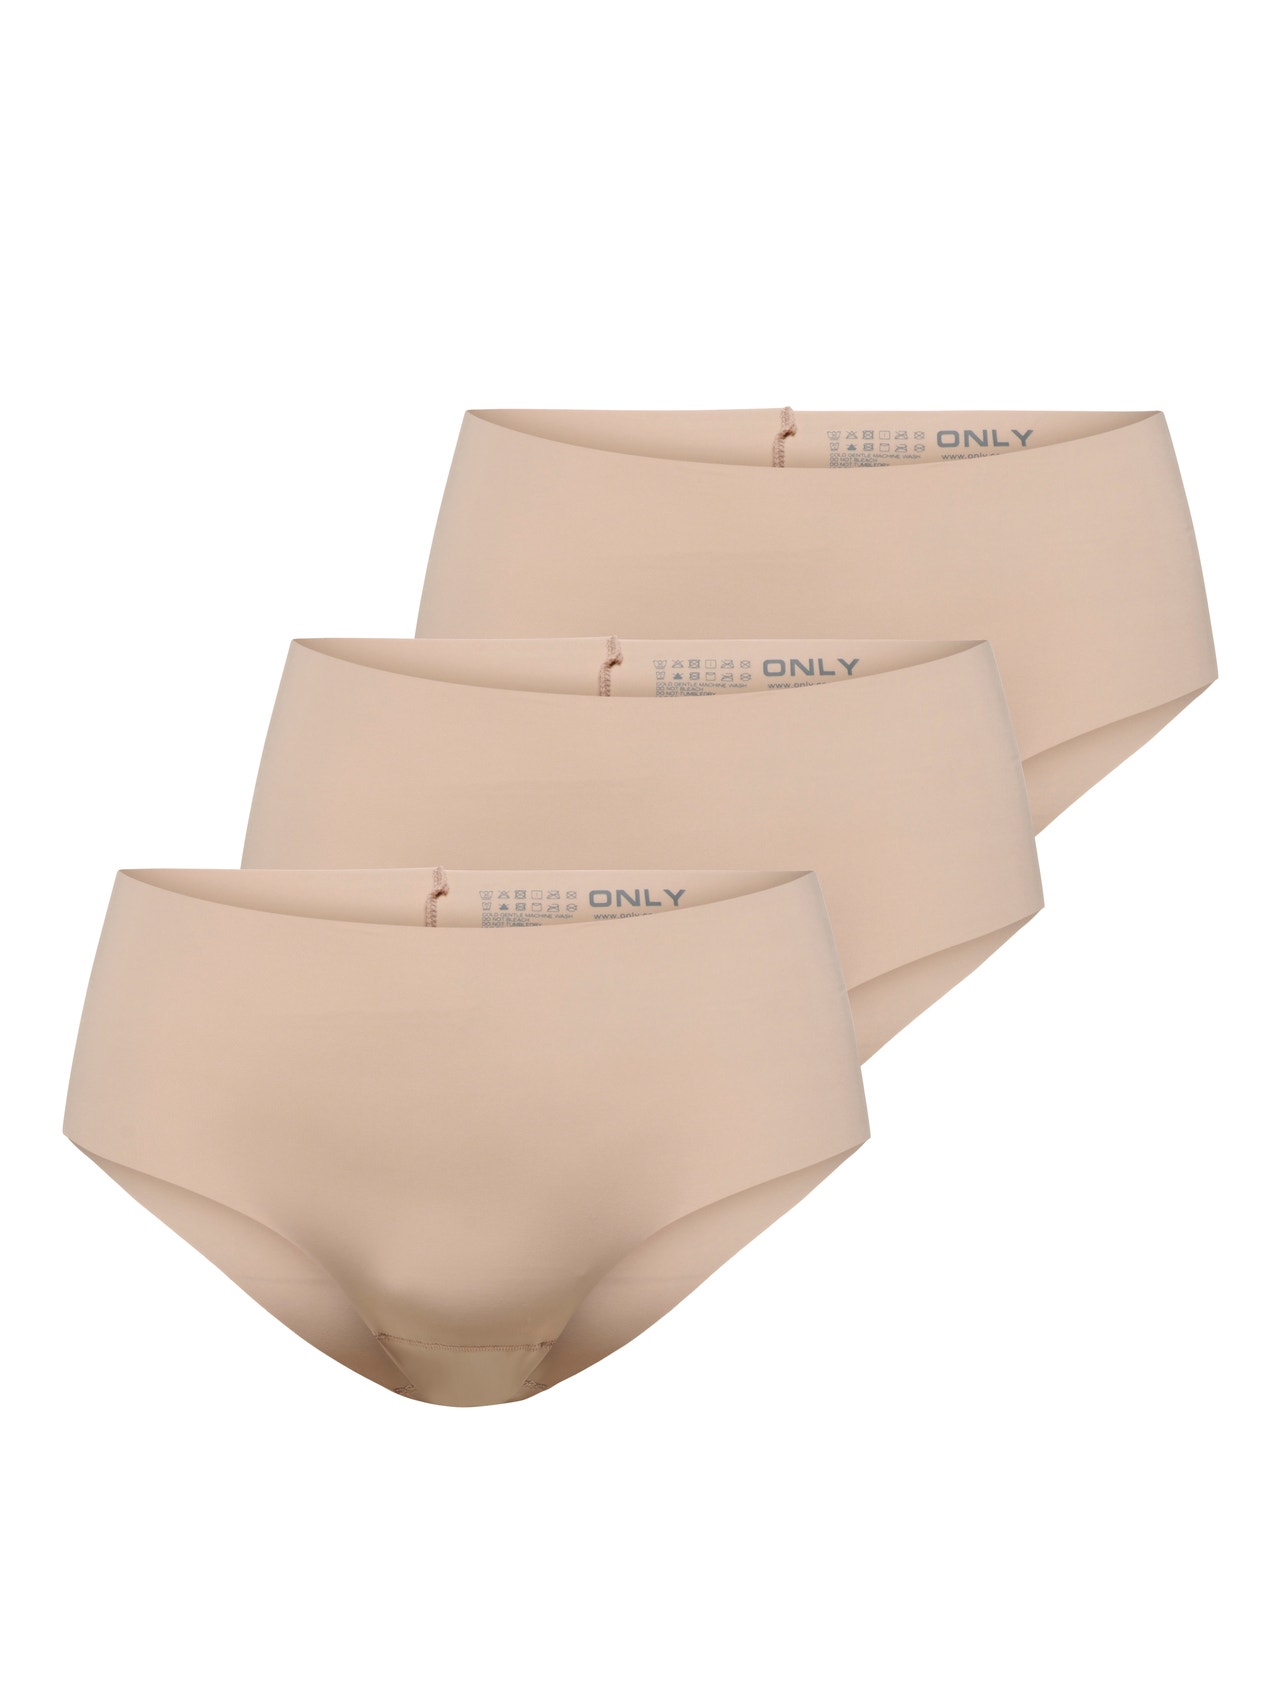 ONLY Low waist Trunks -Rugby Tan - 15295989